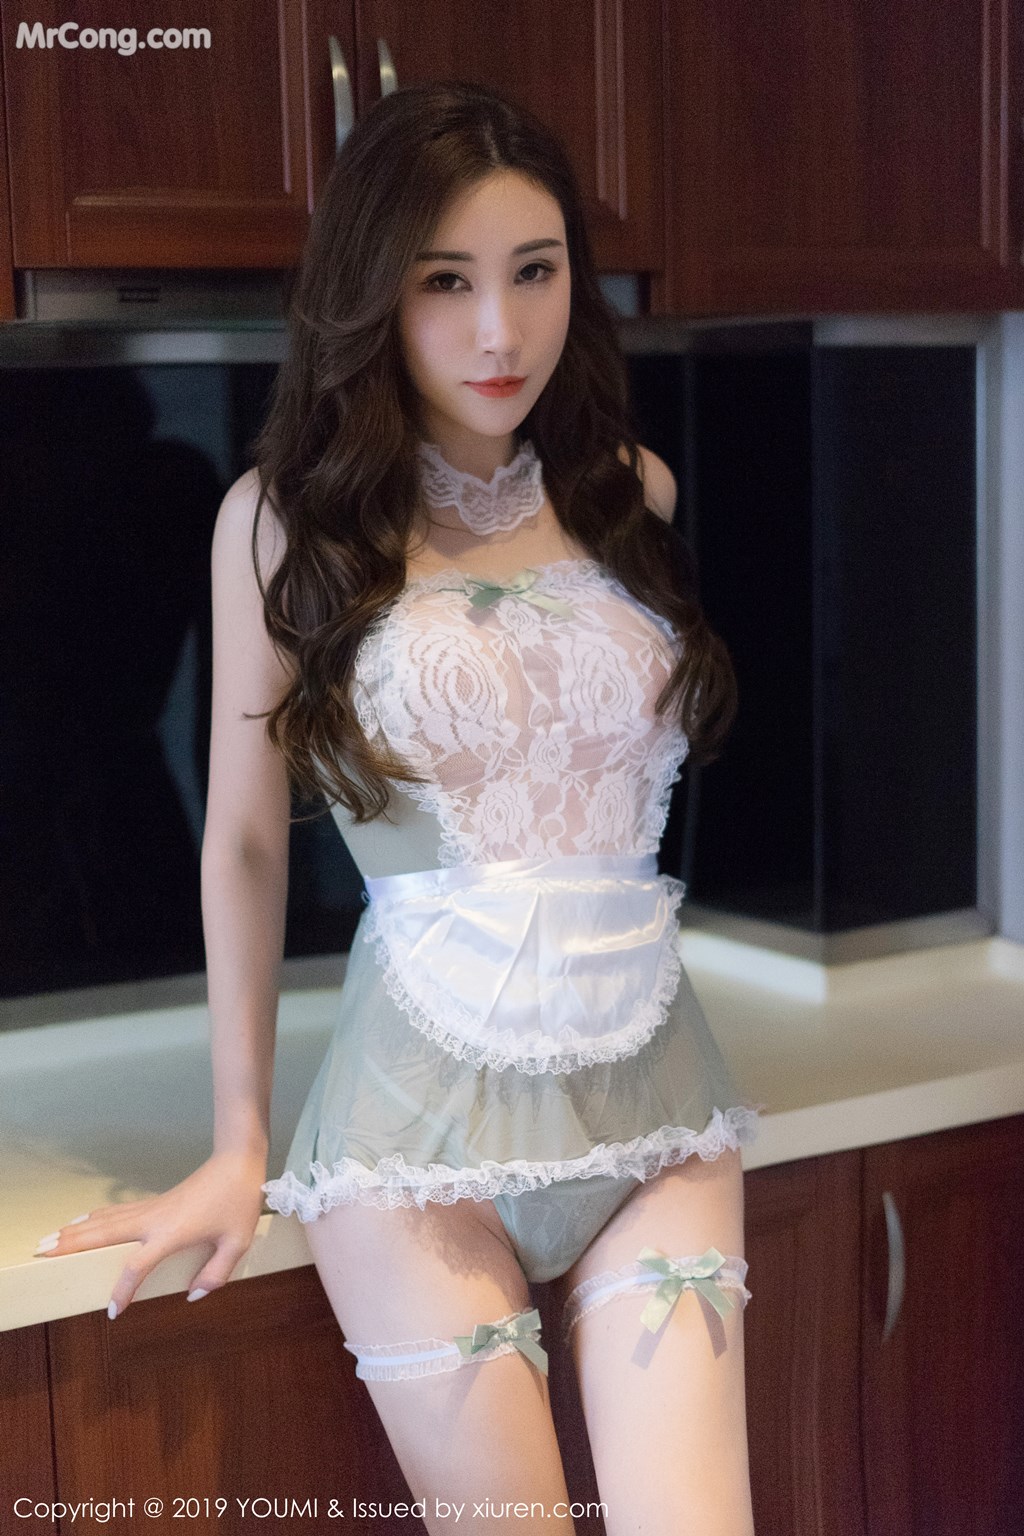 YouMi Vol.337: Sun Meng Yao (孙梦瑶 V) (55 pictures)